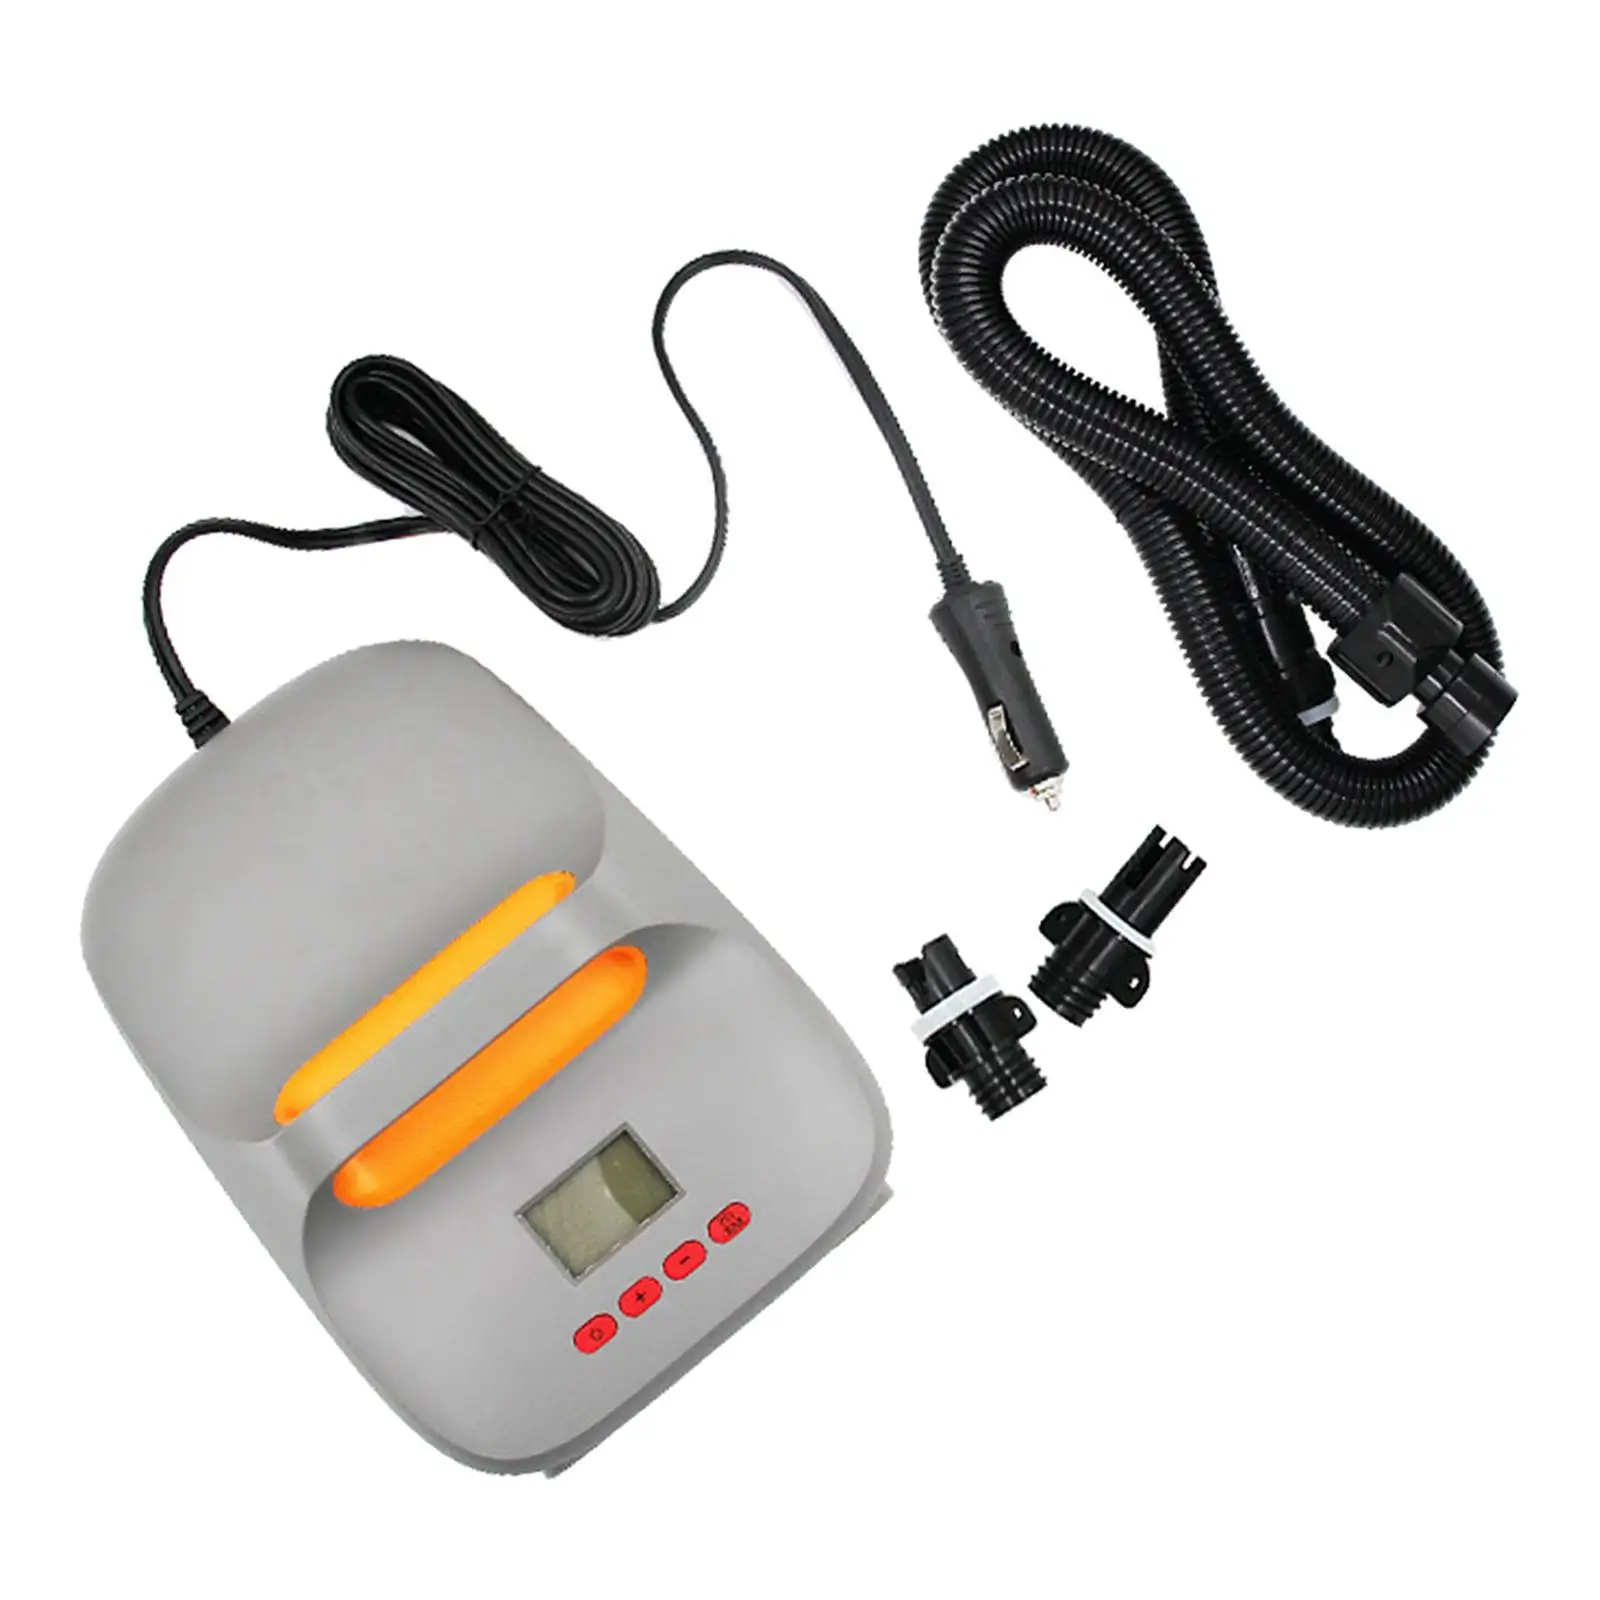 Multifunction Electric Pump 0~20PSI Inflation Deflation W/ 3 Nozzles with LCD 12V DC Dual Stage for Paddle Board Boat